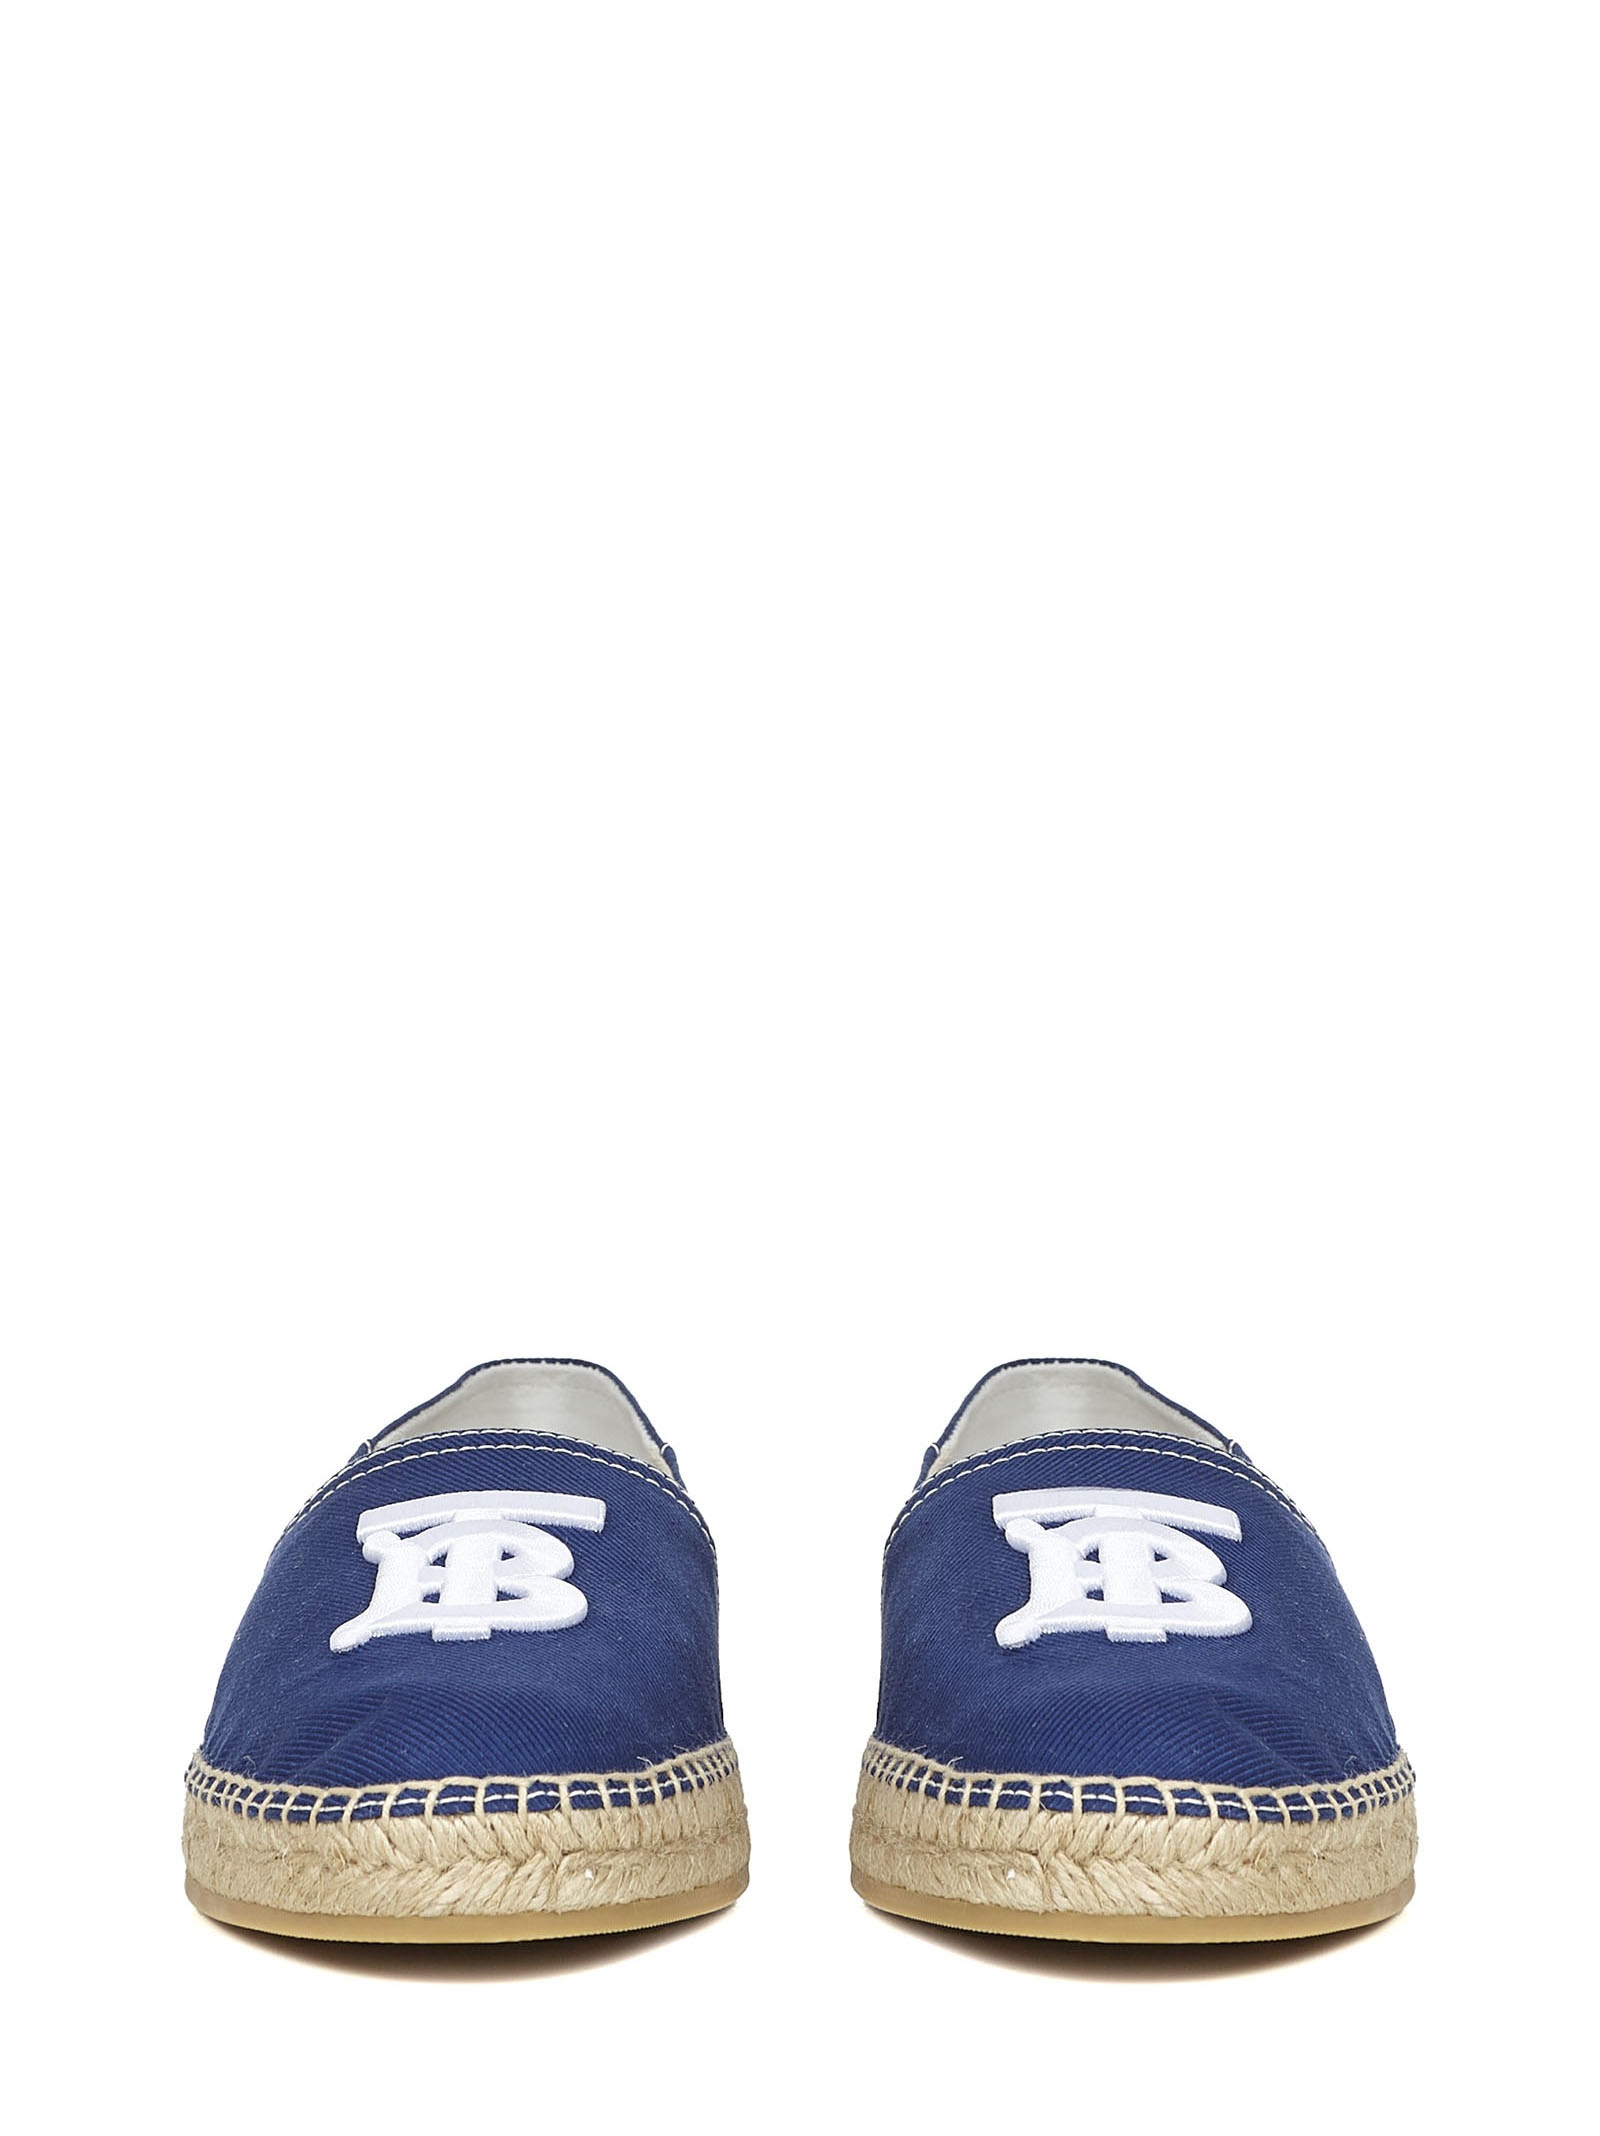 Blue espadrillas in cotton canvas with white monogram logo applied on the front. - 3